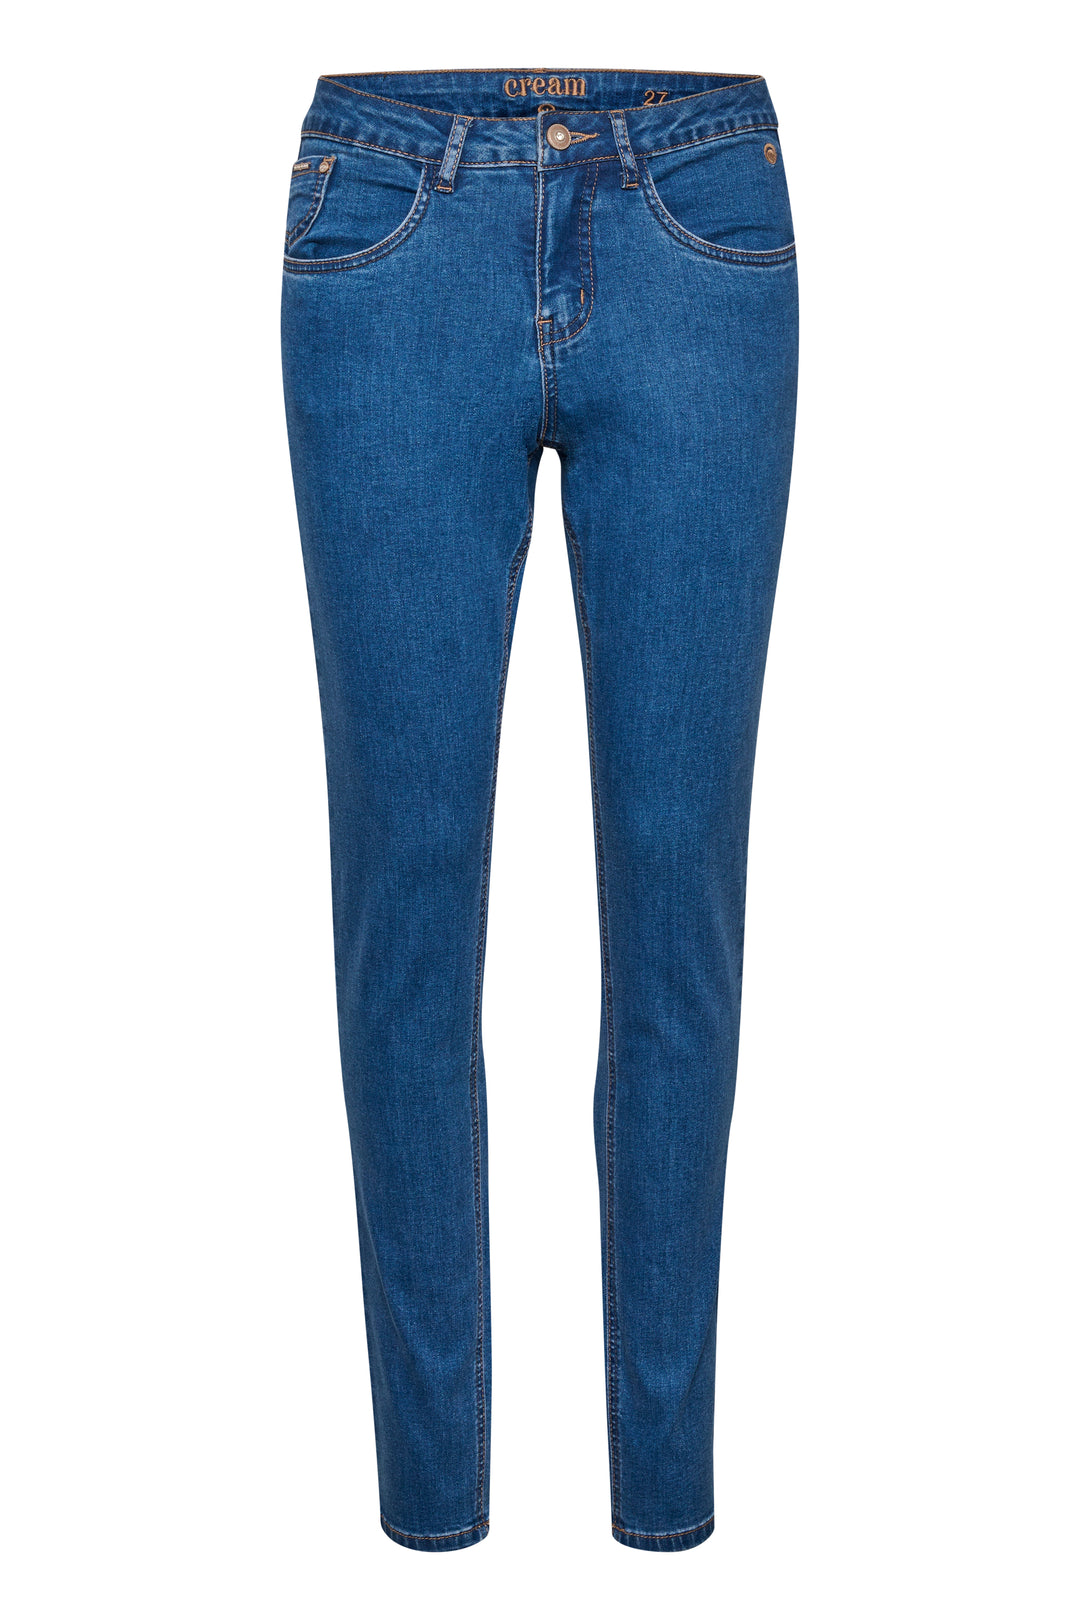 Jeans coco fit coupe droite